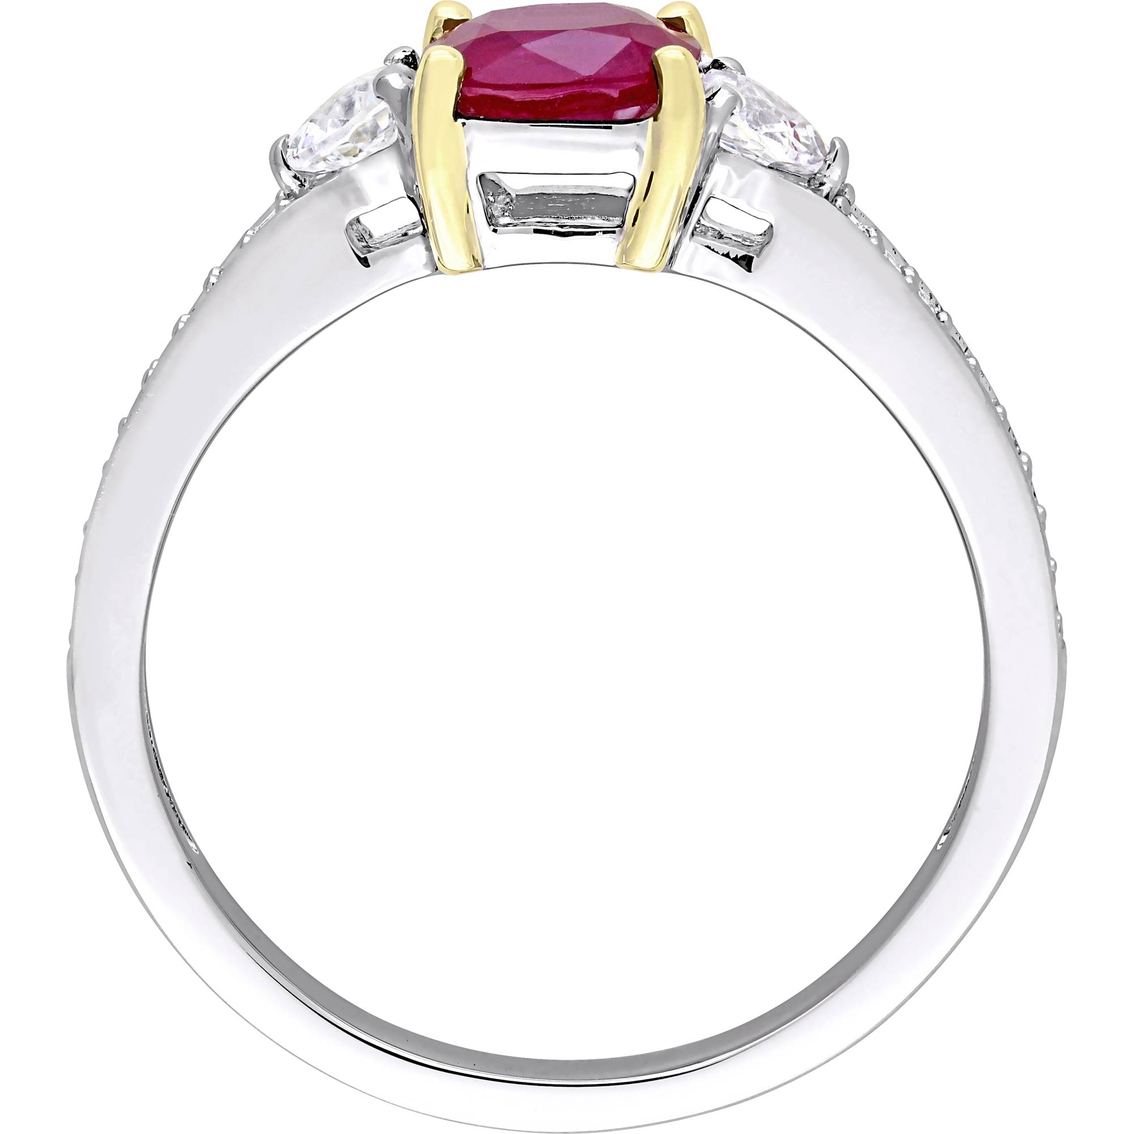 Sofia B. 14K Two-Tone Gold 3-Stone Ruby and White Sapphire 1/10 CTW Diamond Ring - Image 2 of 4